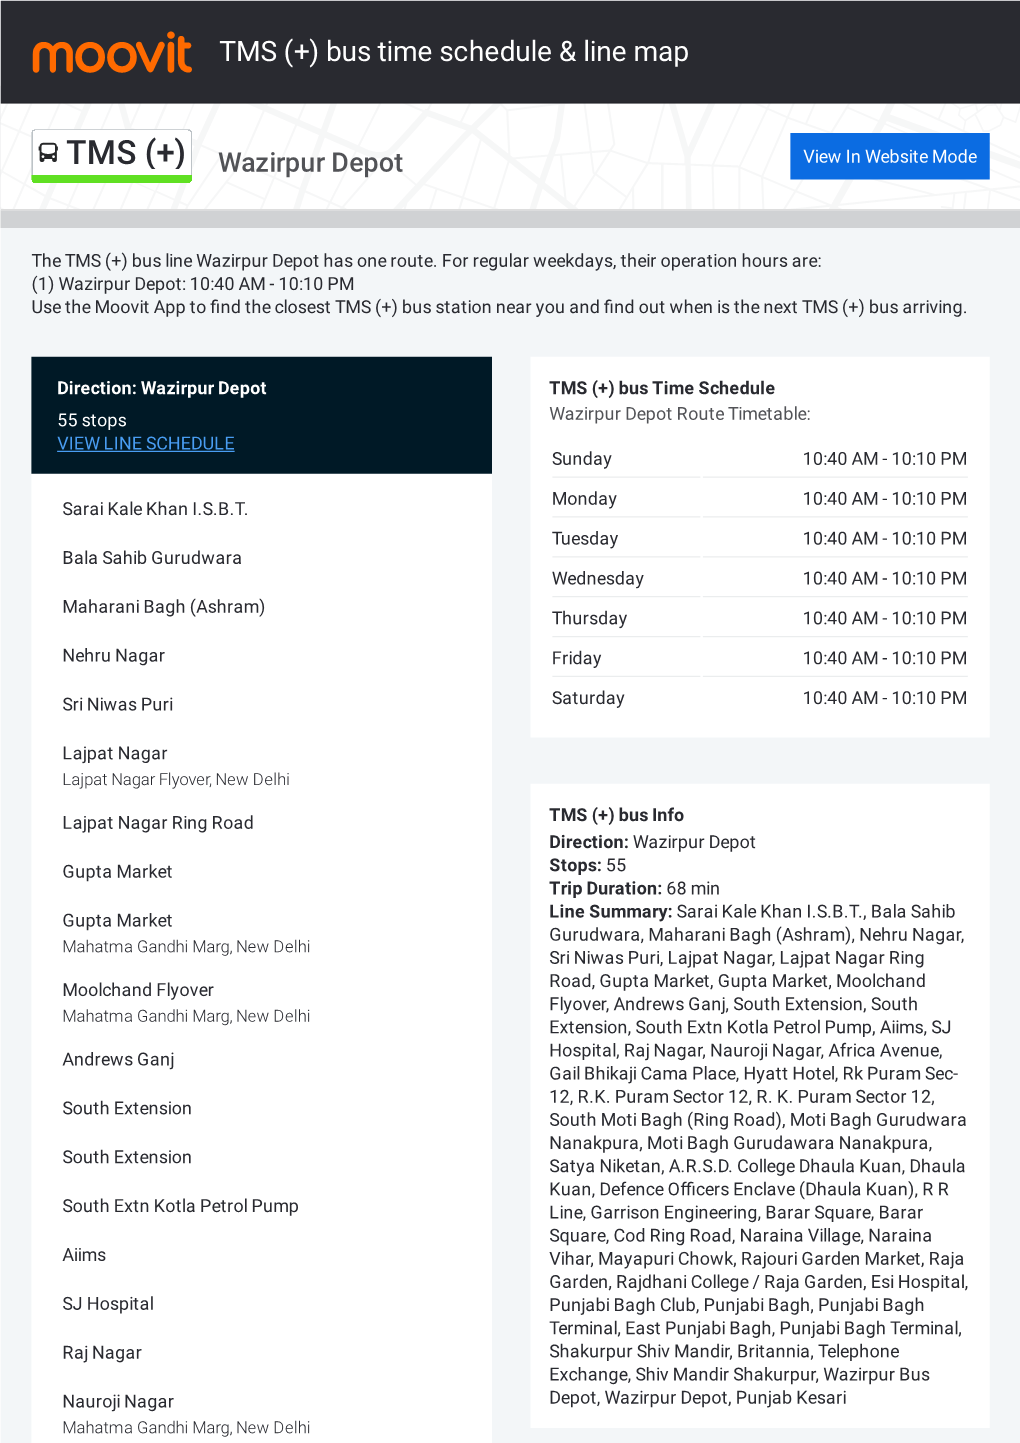 TMS (+) Bus Time Schedule & Line Route